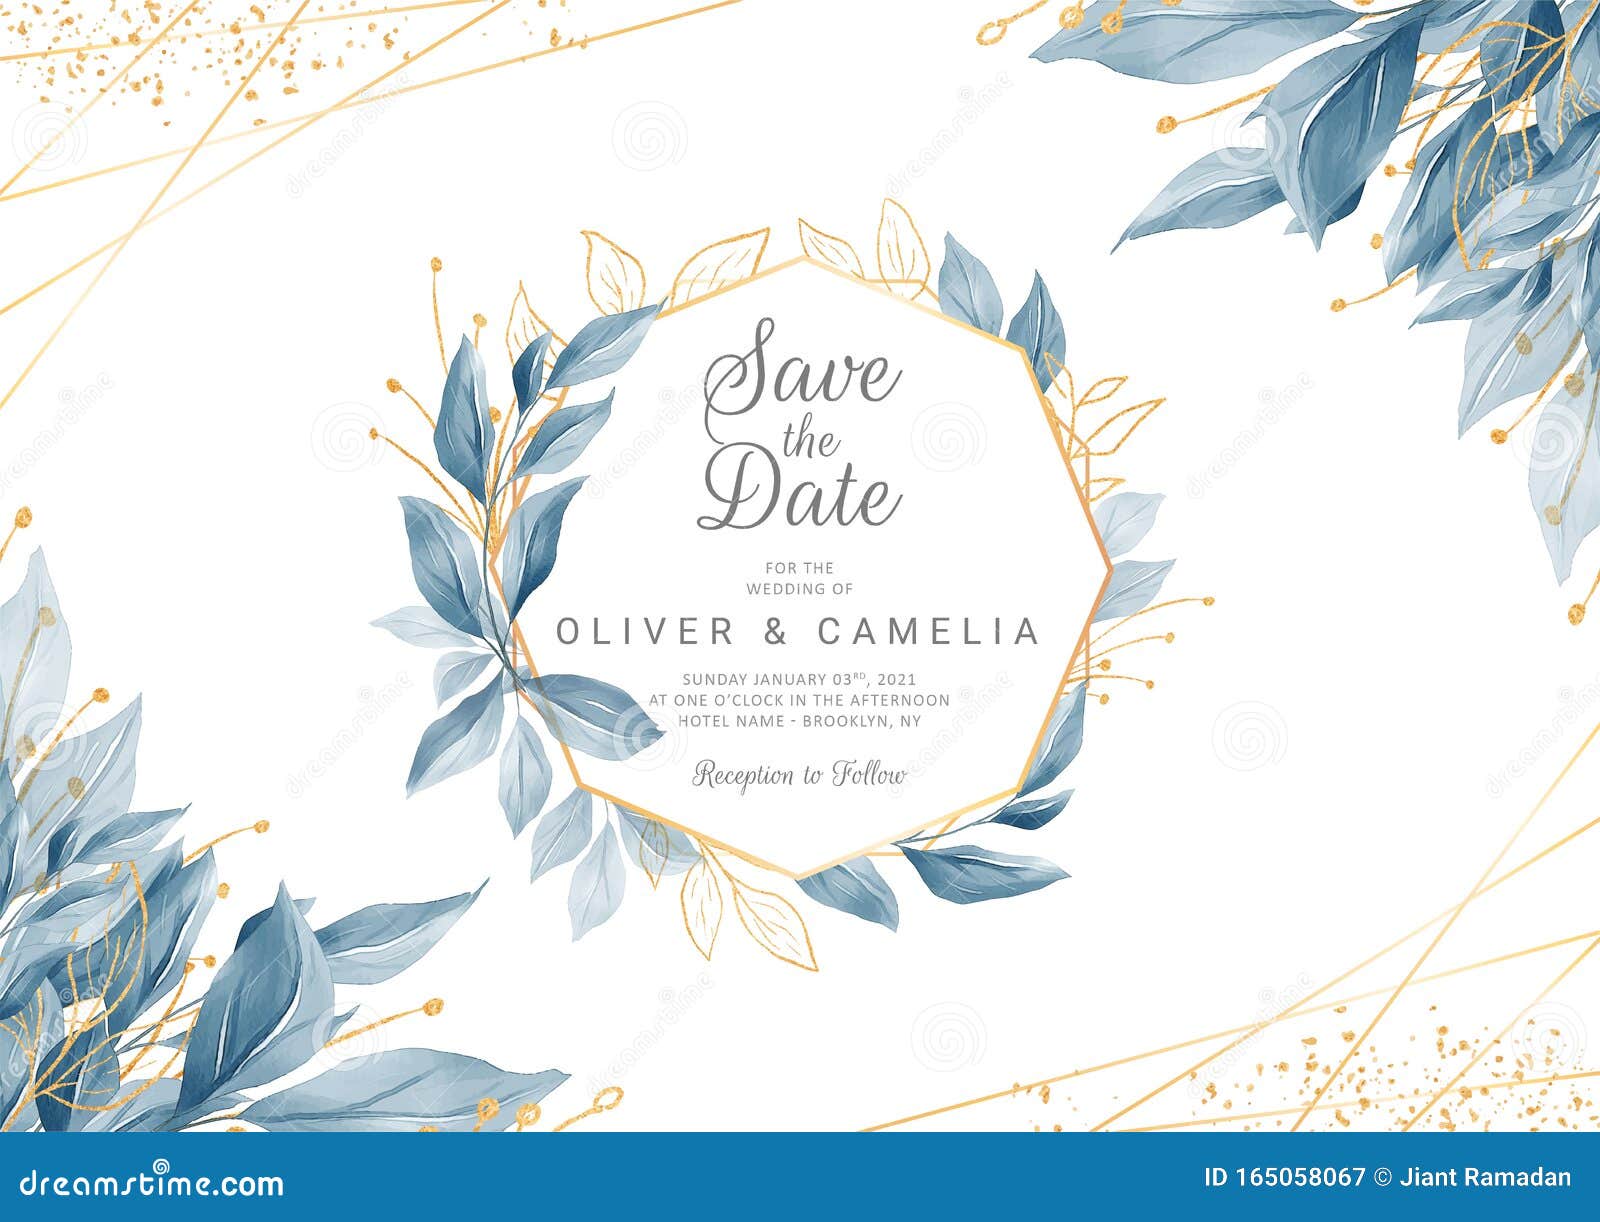 modern navy blue wedding invitation card template with watercolor floral frame and border. greenery floral border save the date,